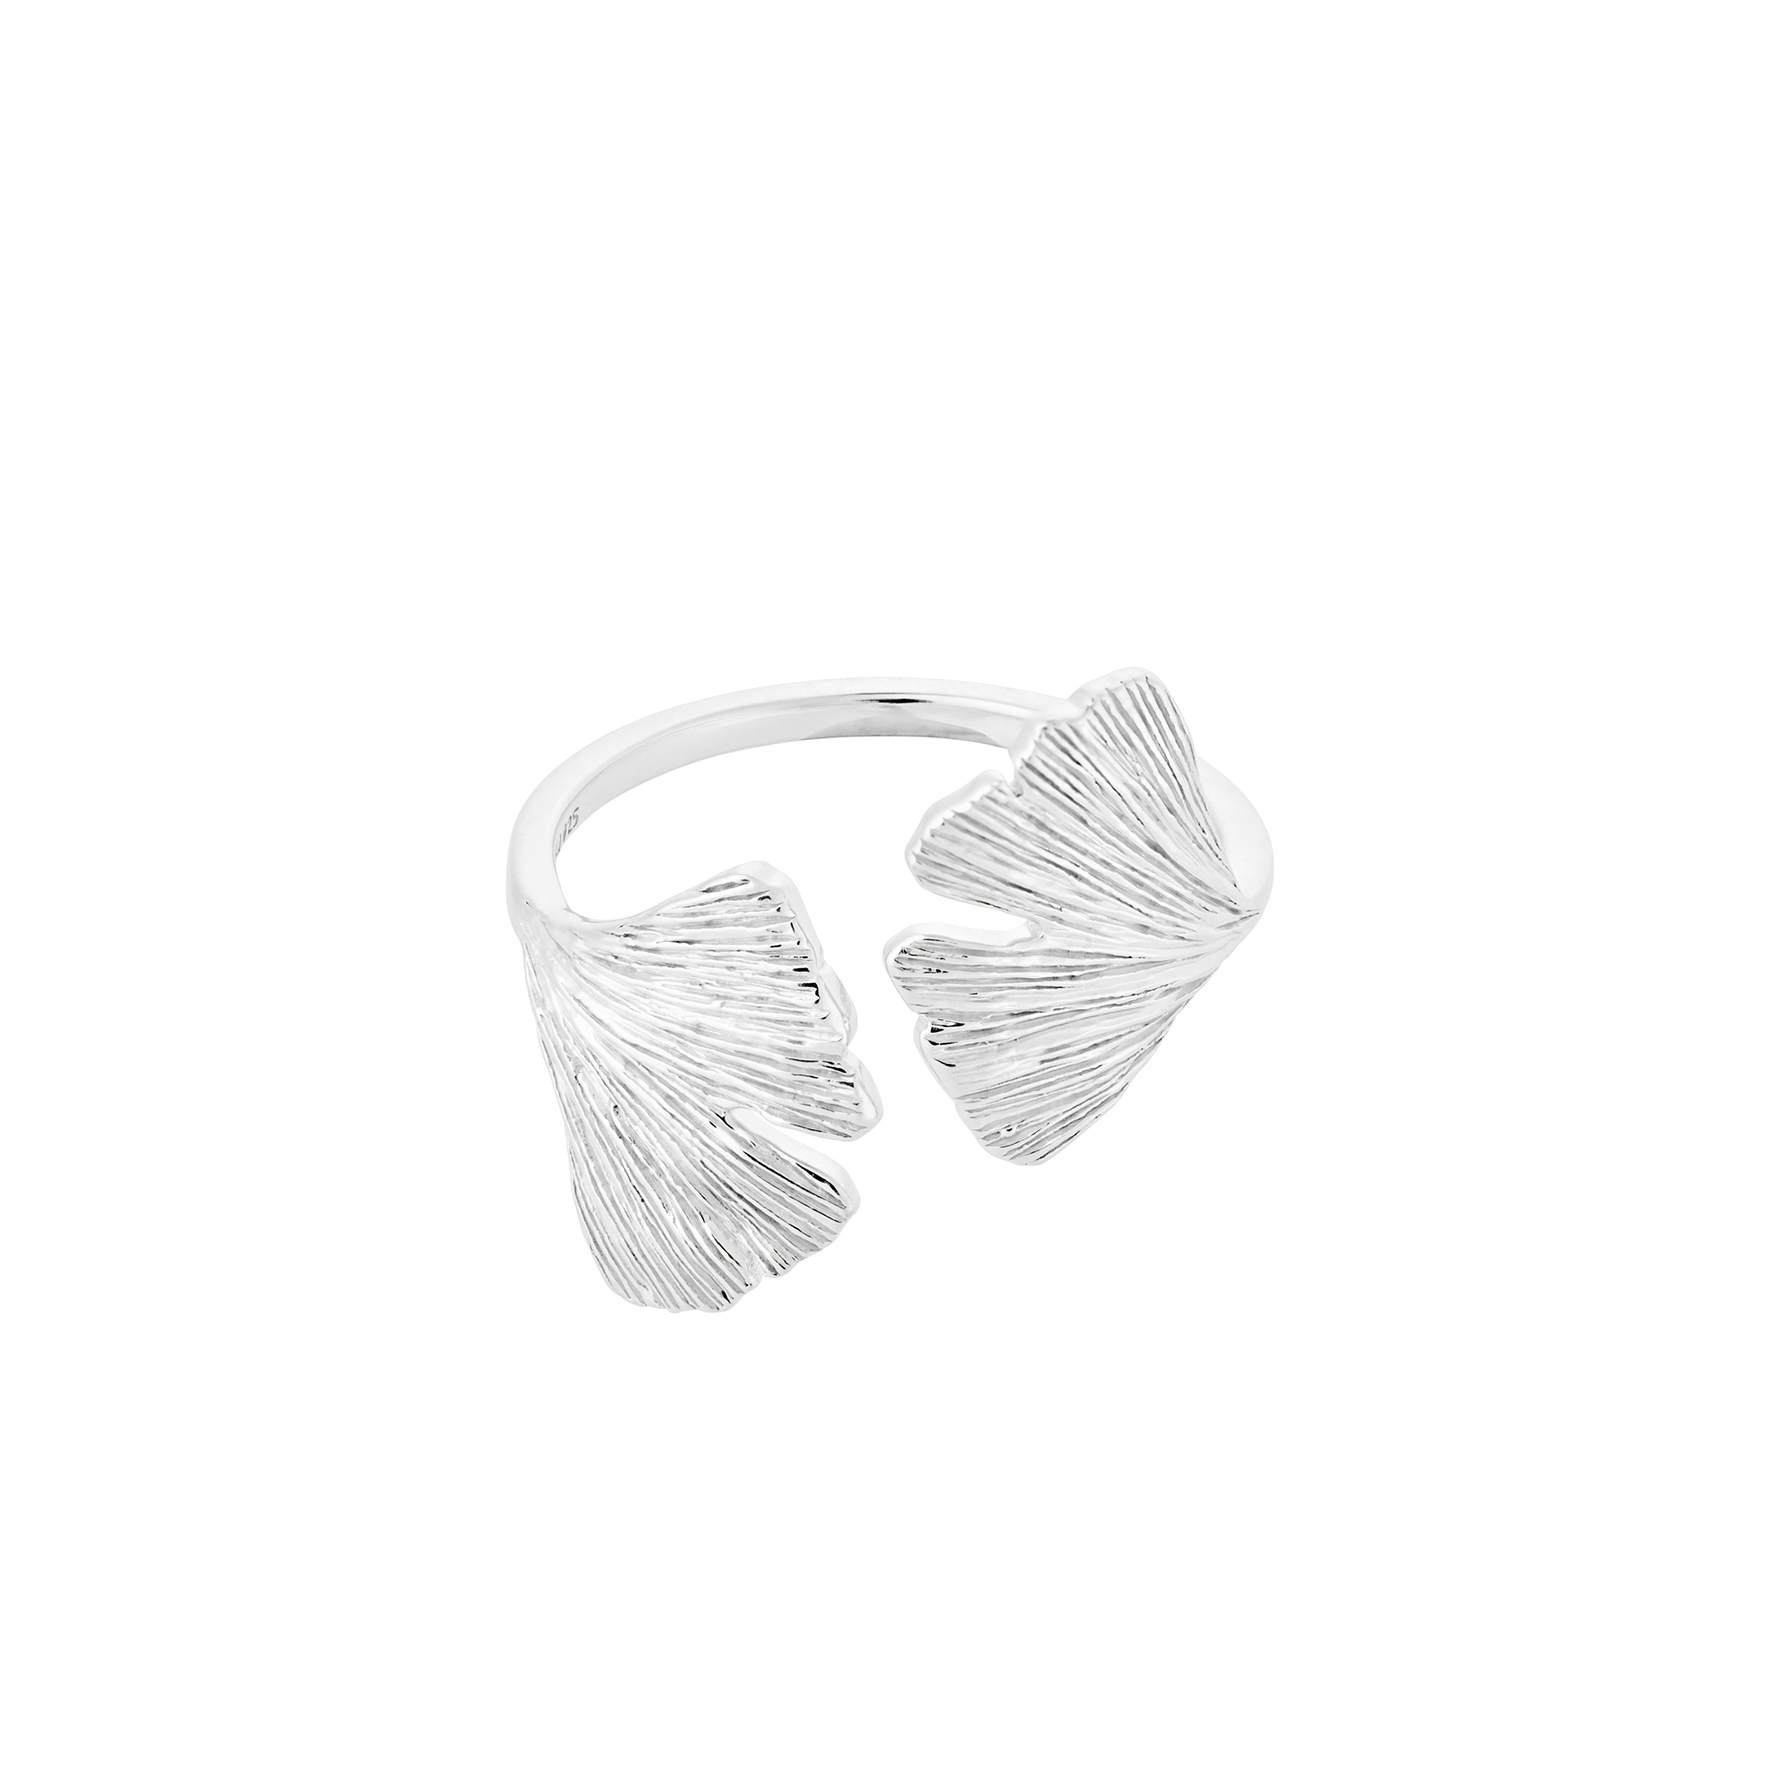 Biloba Ring from Pernille Corydon in Silver Sterling 925